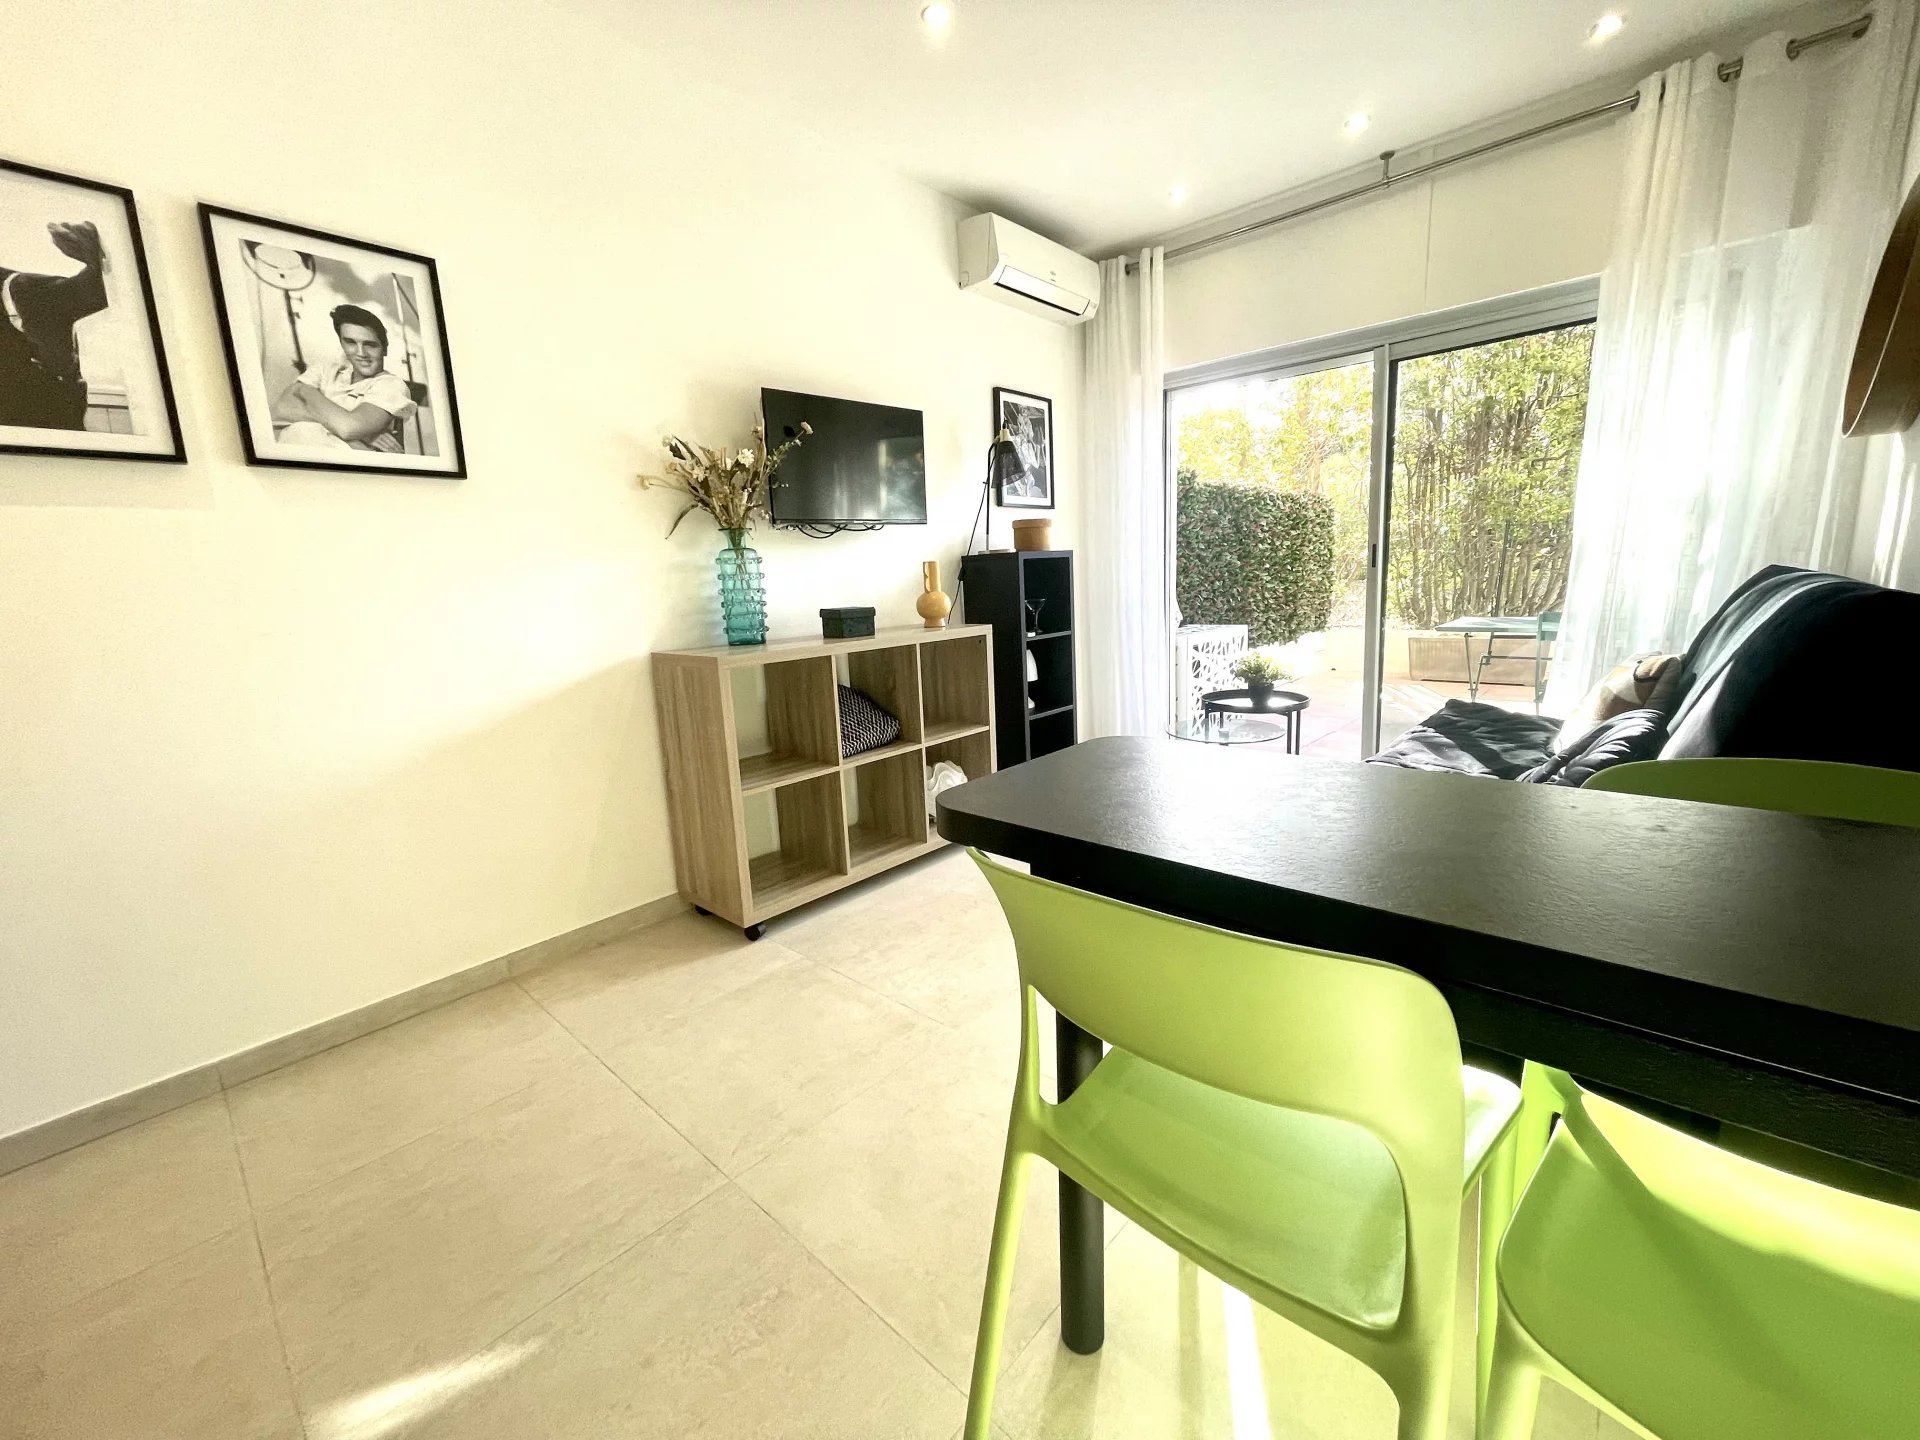 For sale in CANNES 1 room apartment close beaches